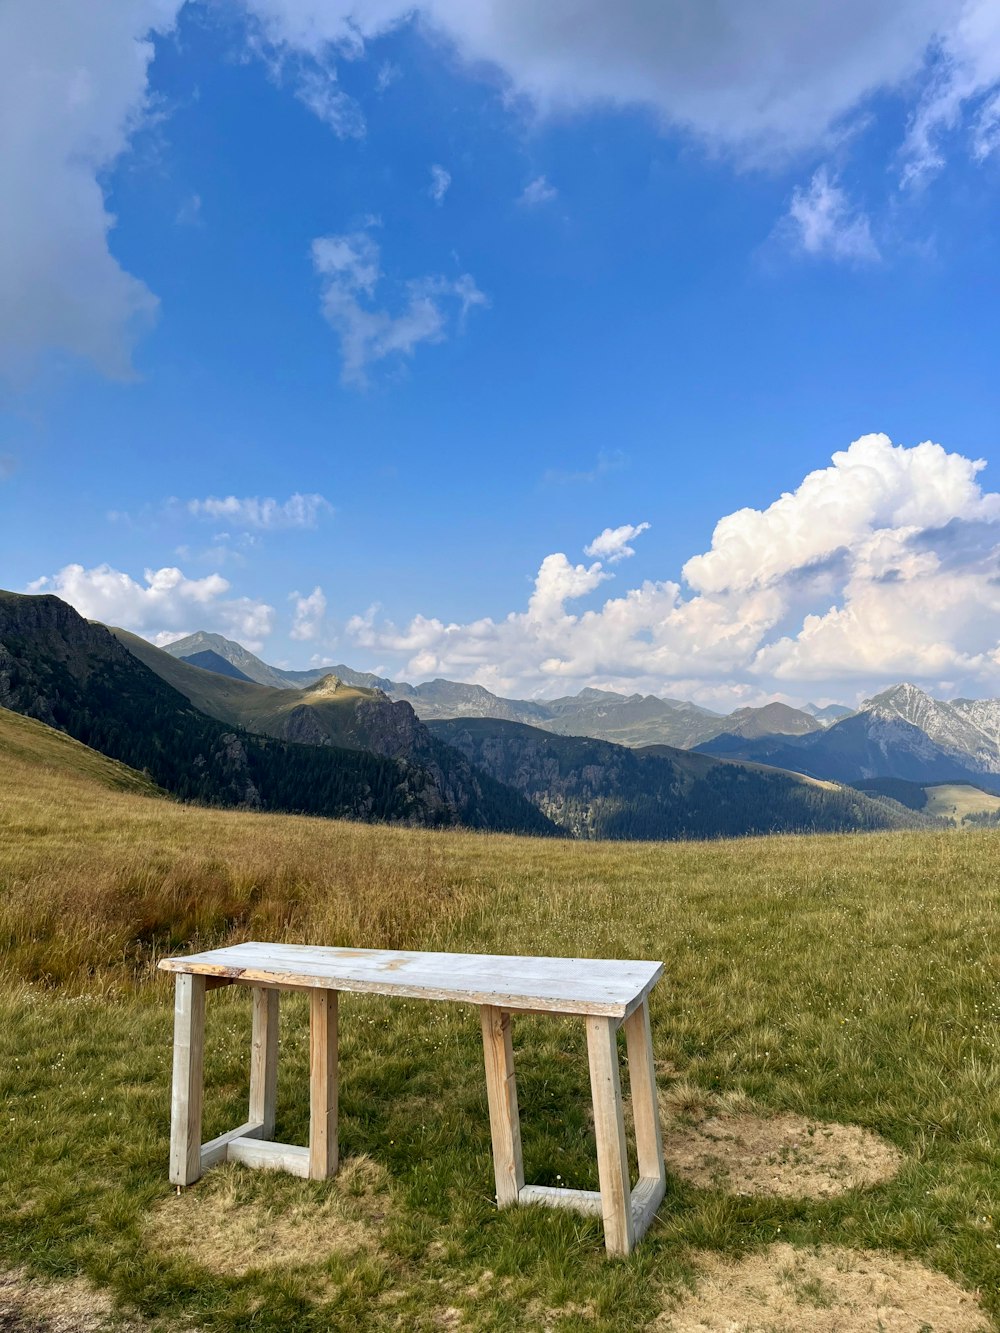 a picnic table in a field